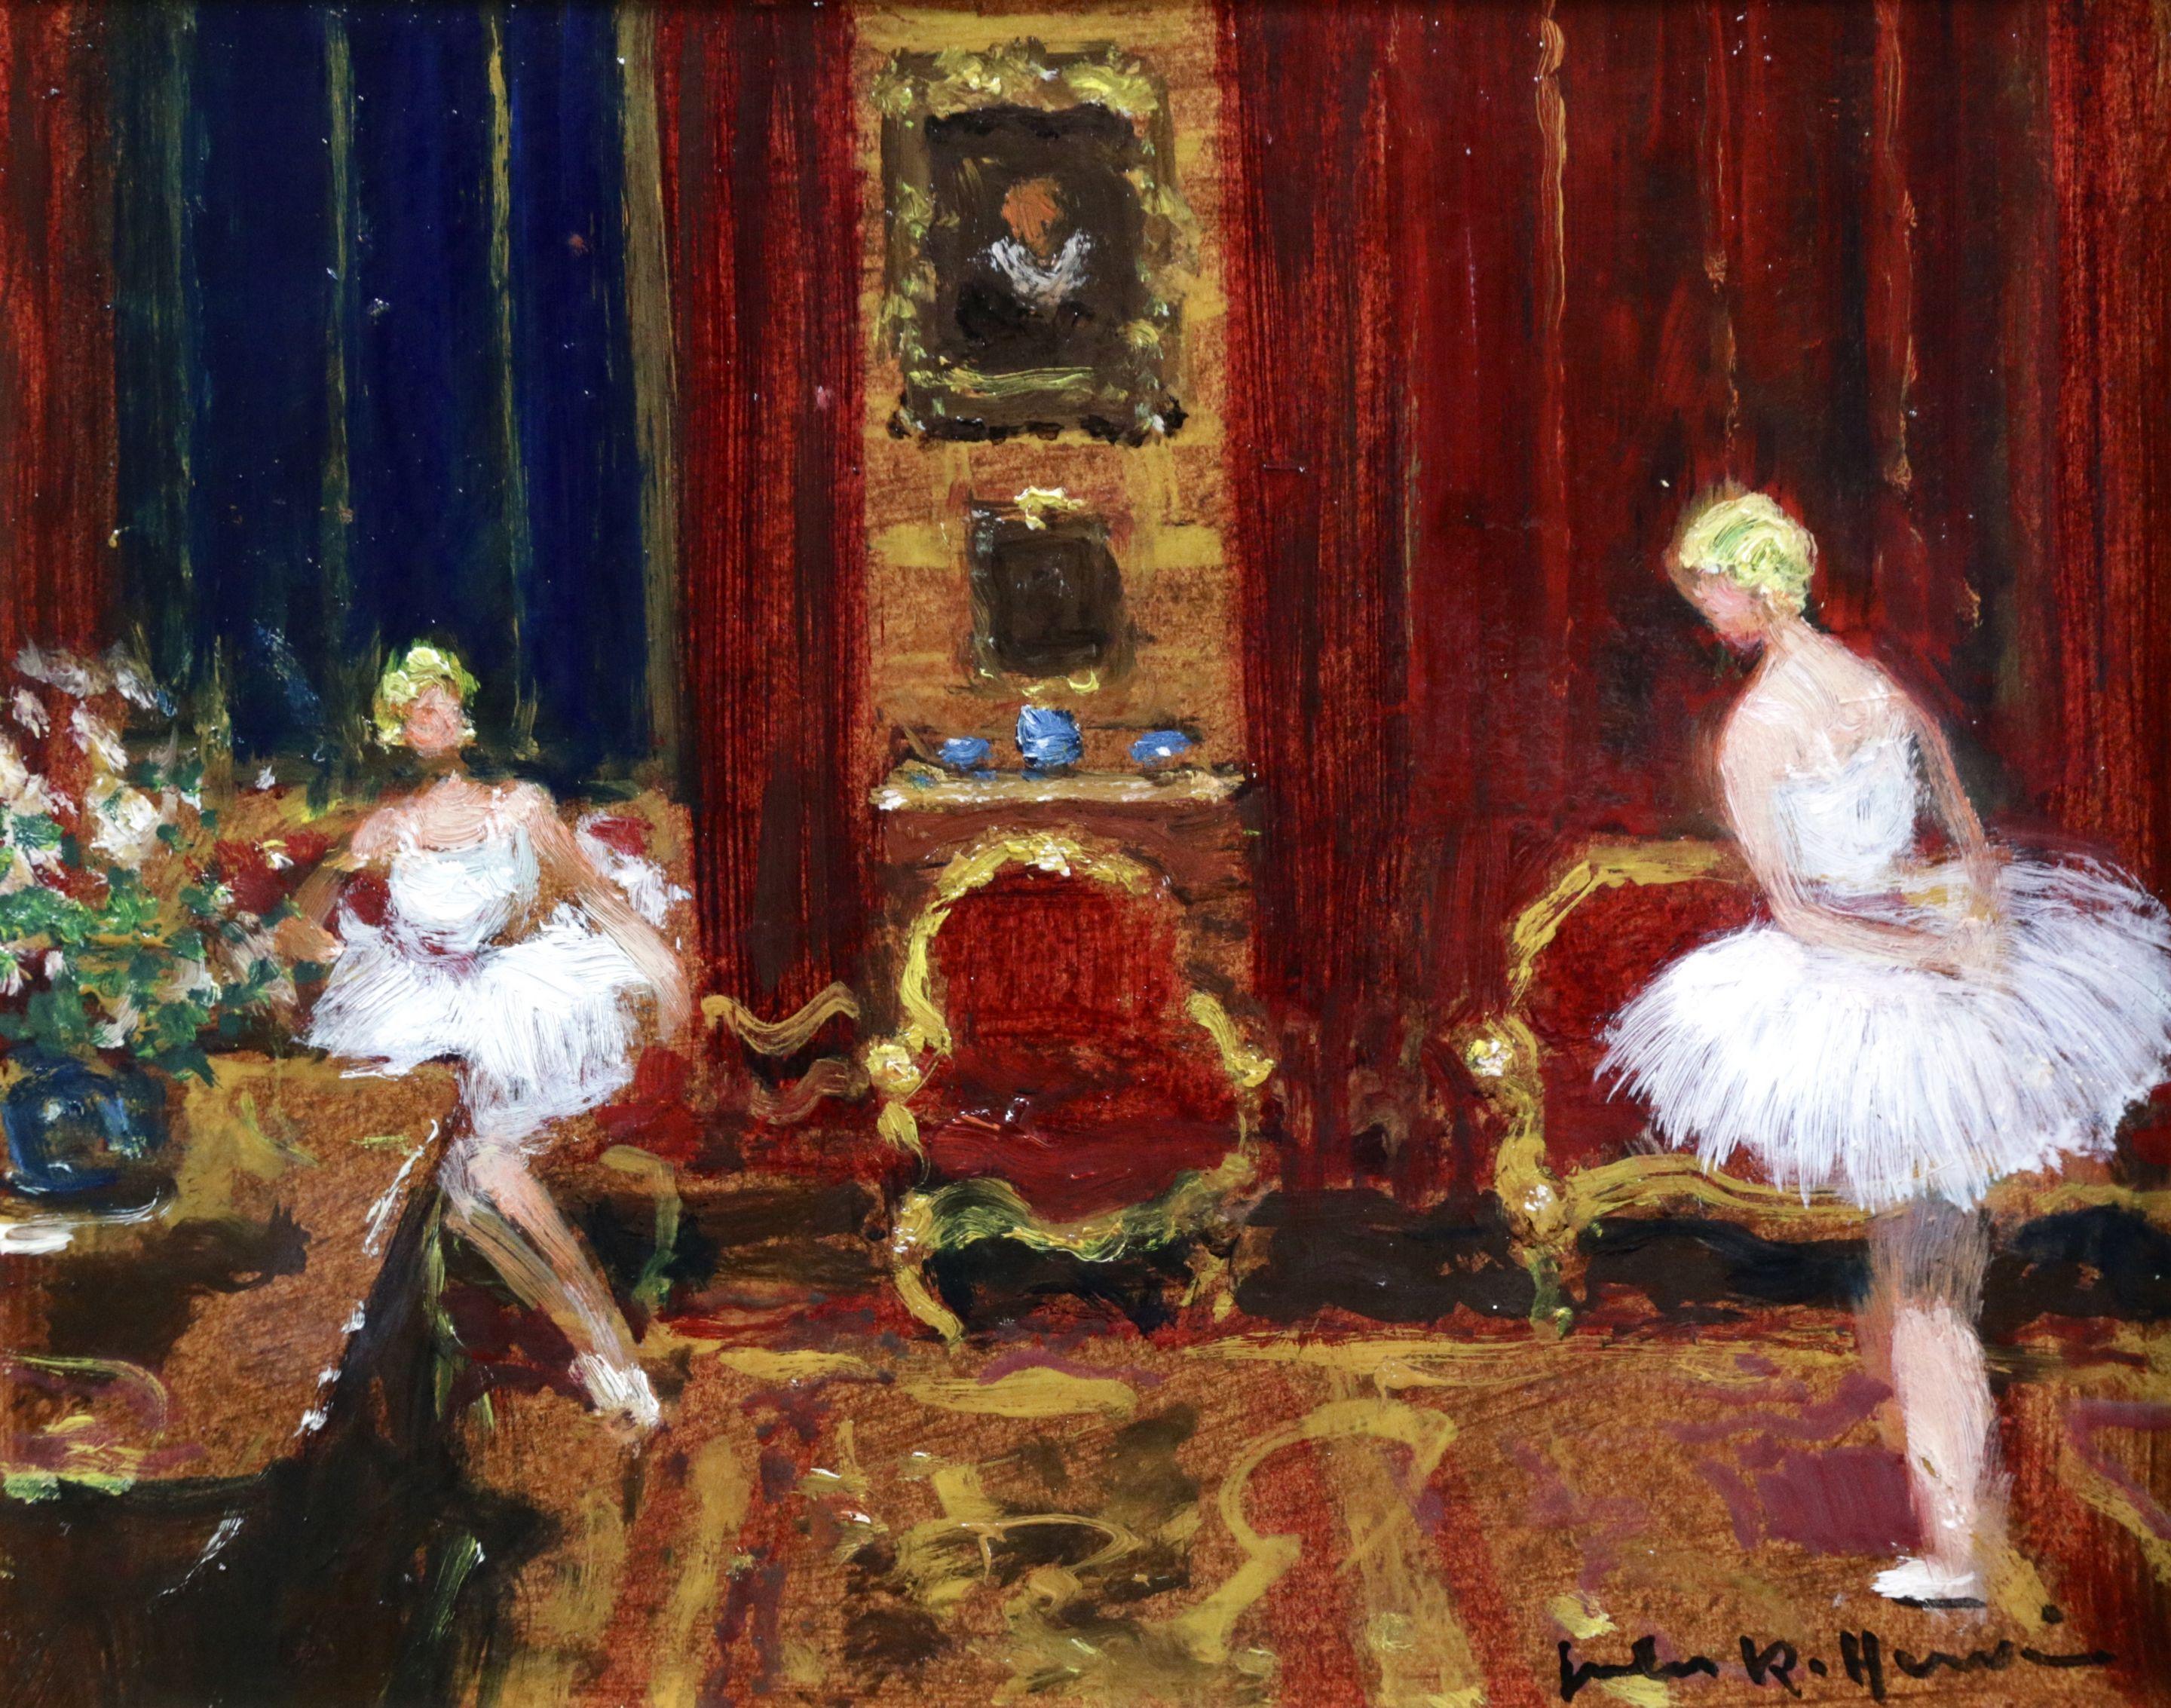 Danseuse a l'Atelier - 20th Century Oil, Ballerina Figures in Interior by Herve